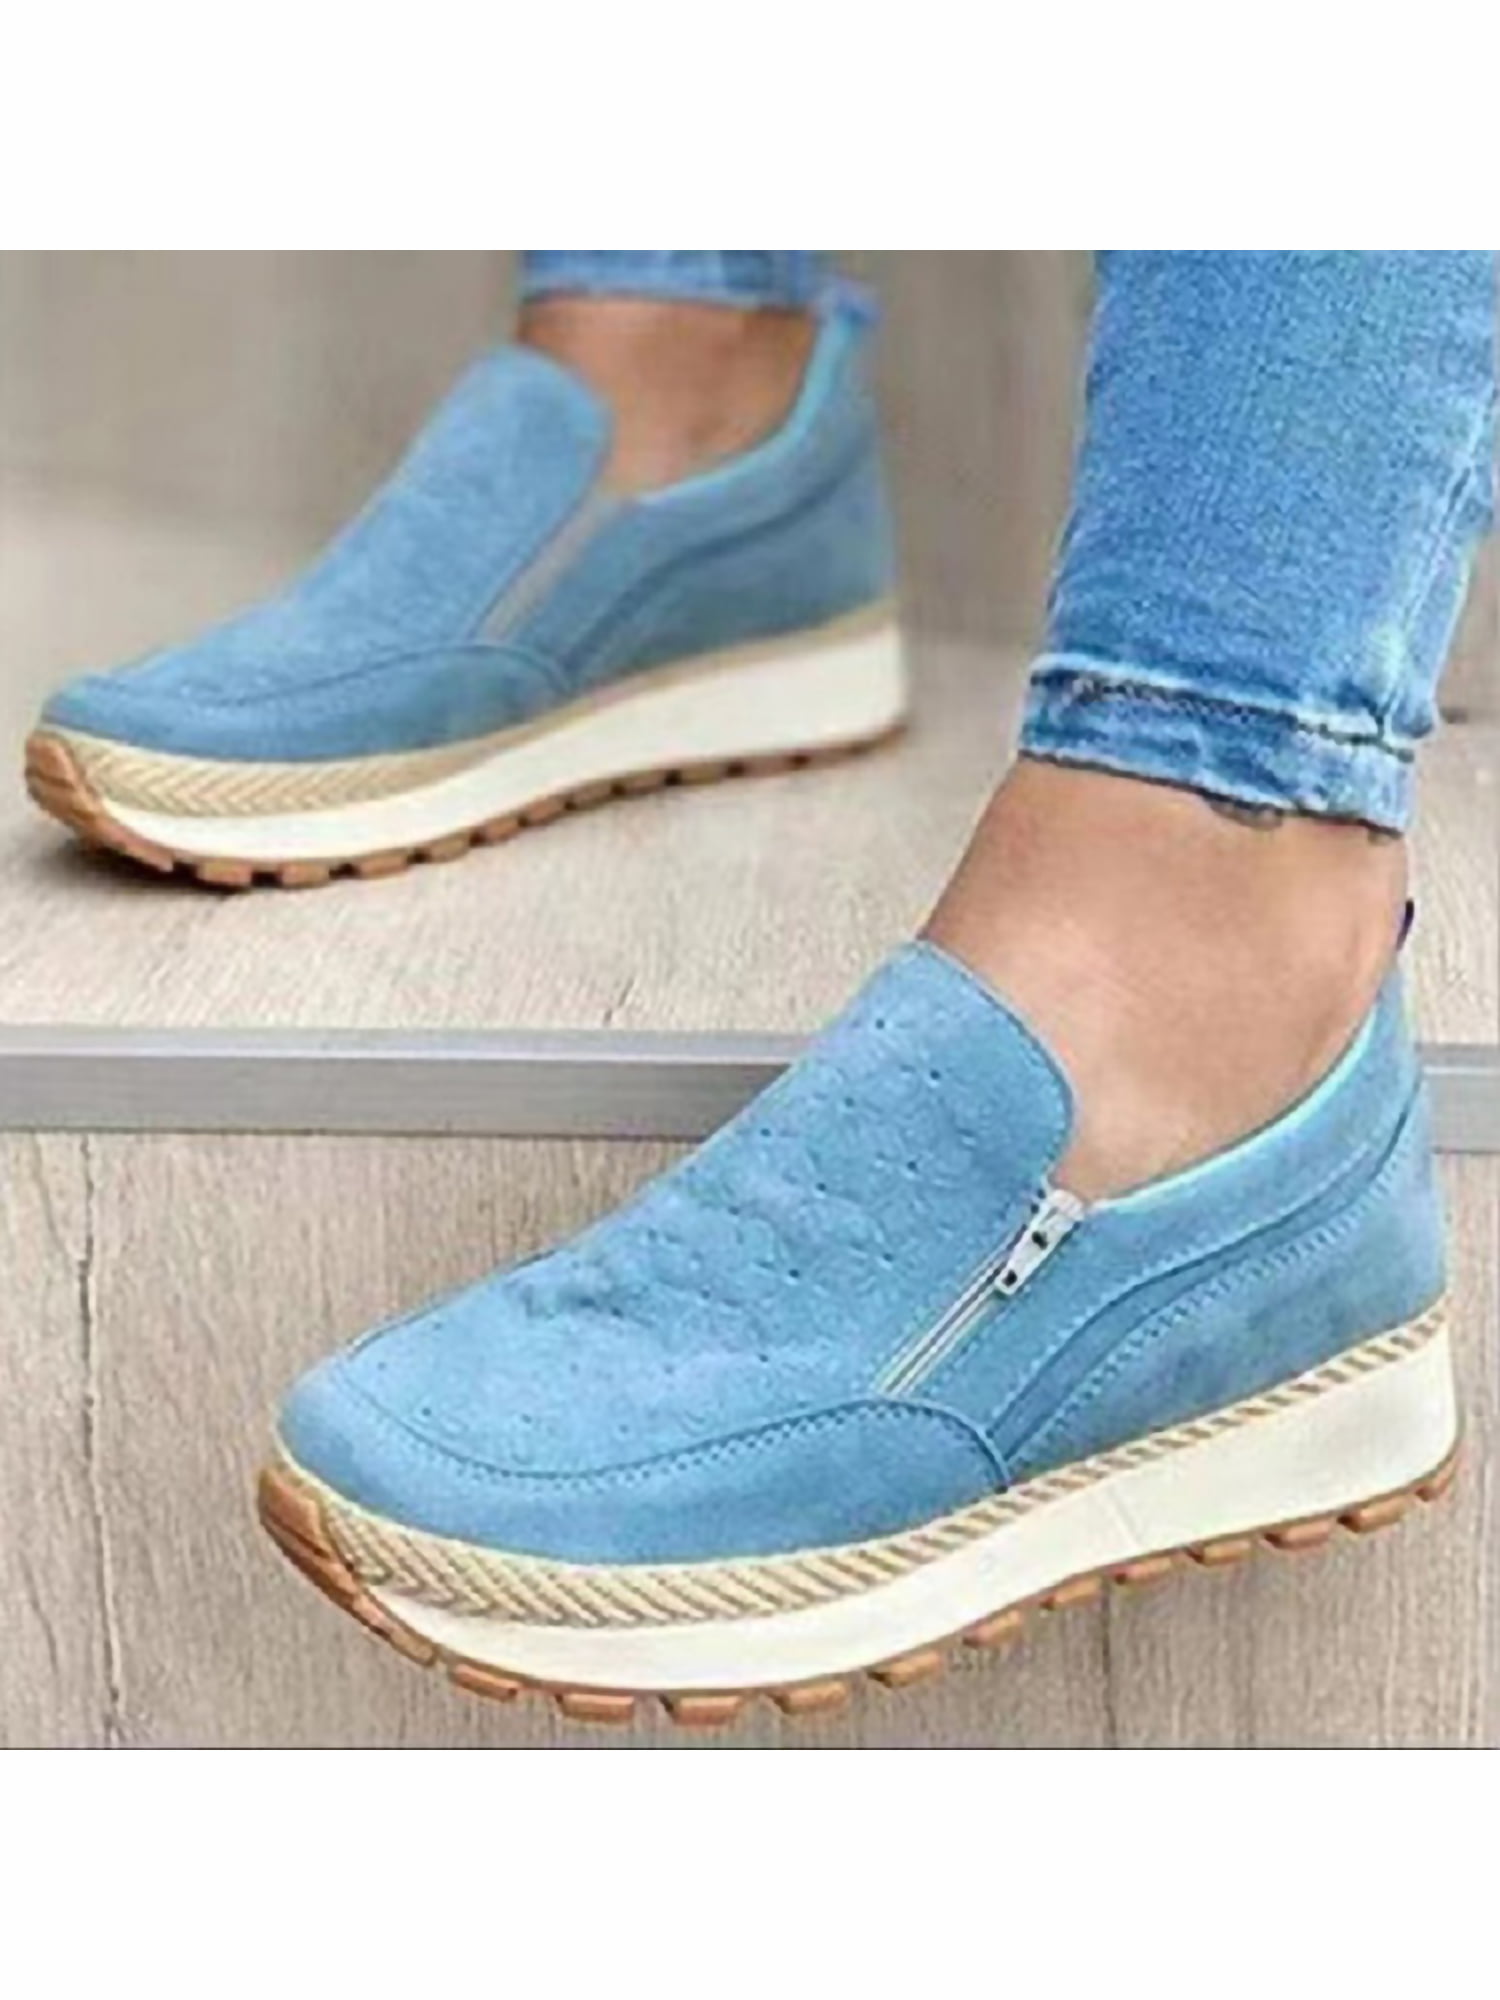 Women Hidden Wedge Cow Leather Round Toe Fashion Sneakers Slip On Loafers Casual 